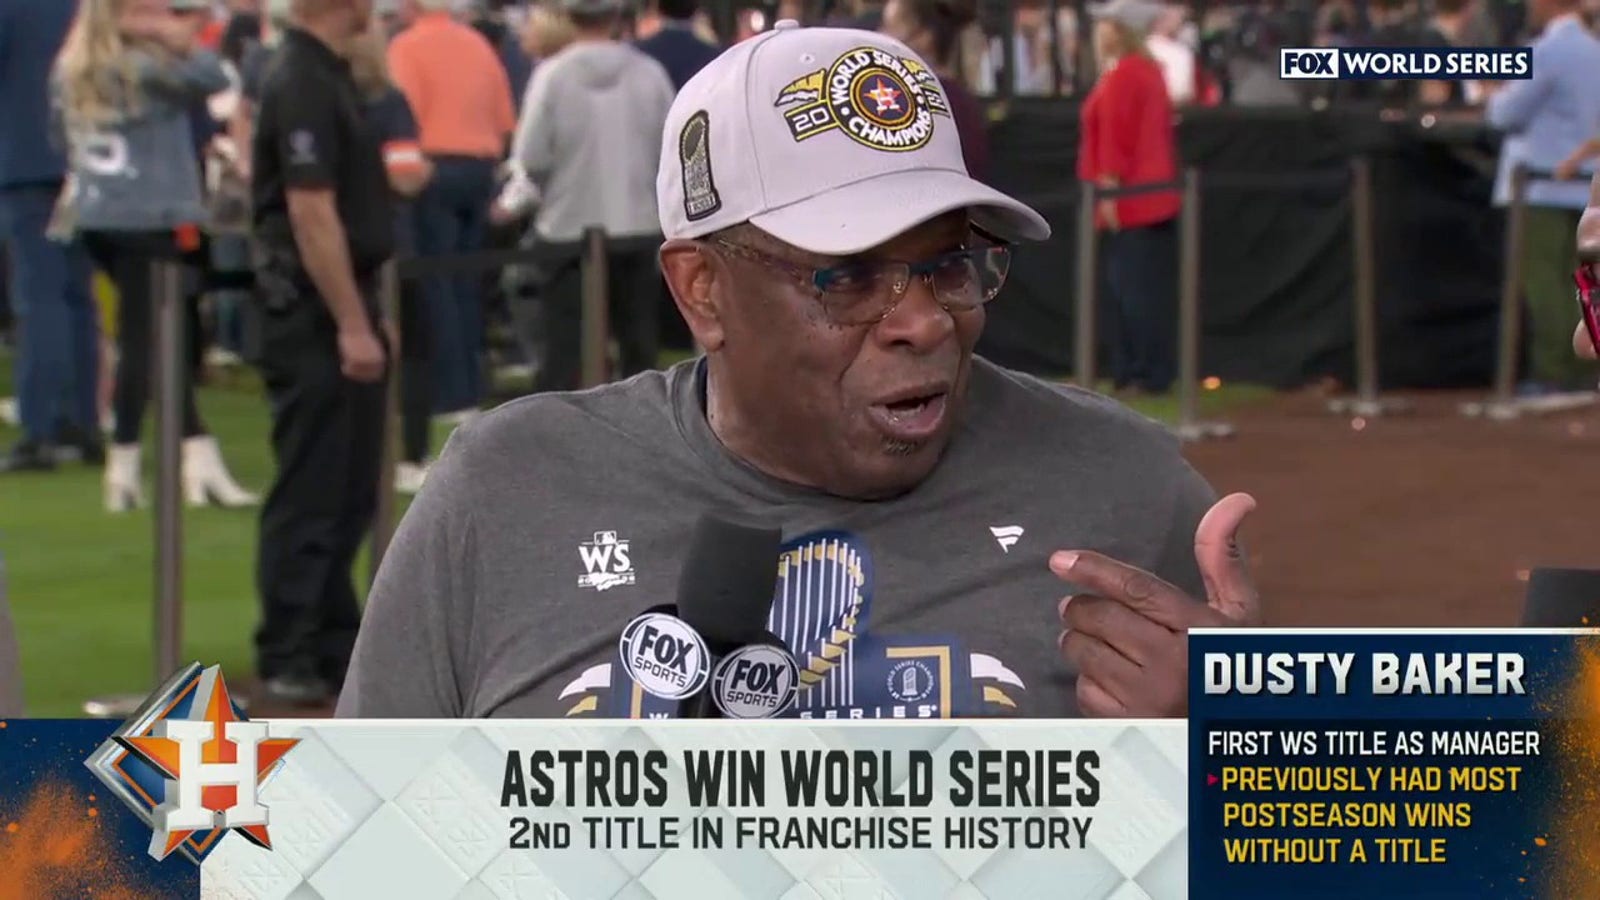 Dusty Baker basks in his first title